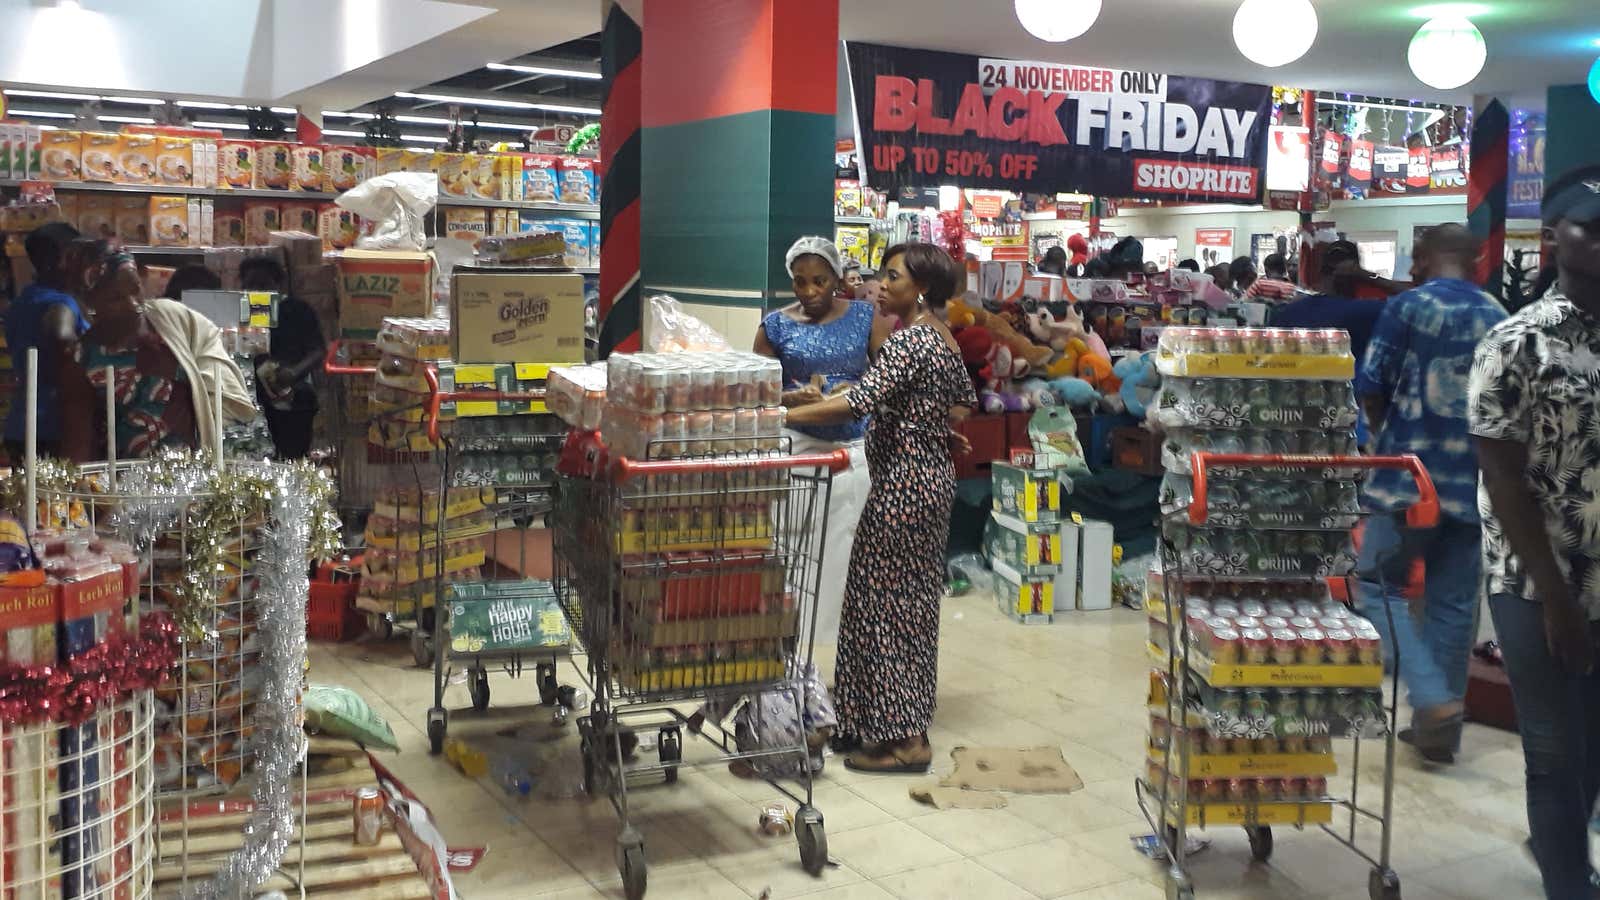 The lines were round the block at Shoprite in Ibadan by 8am on Black Friday